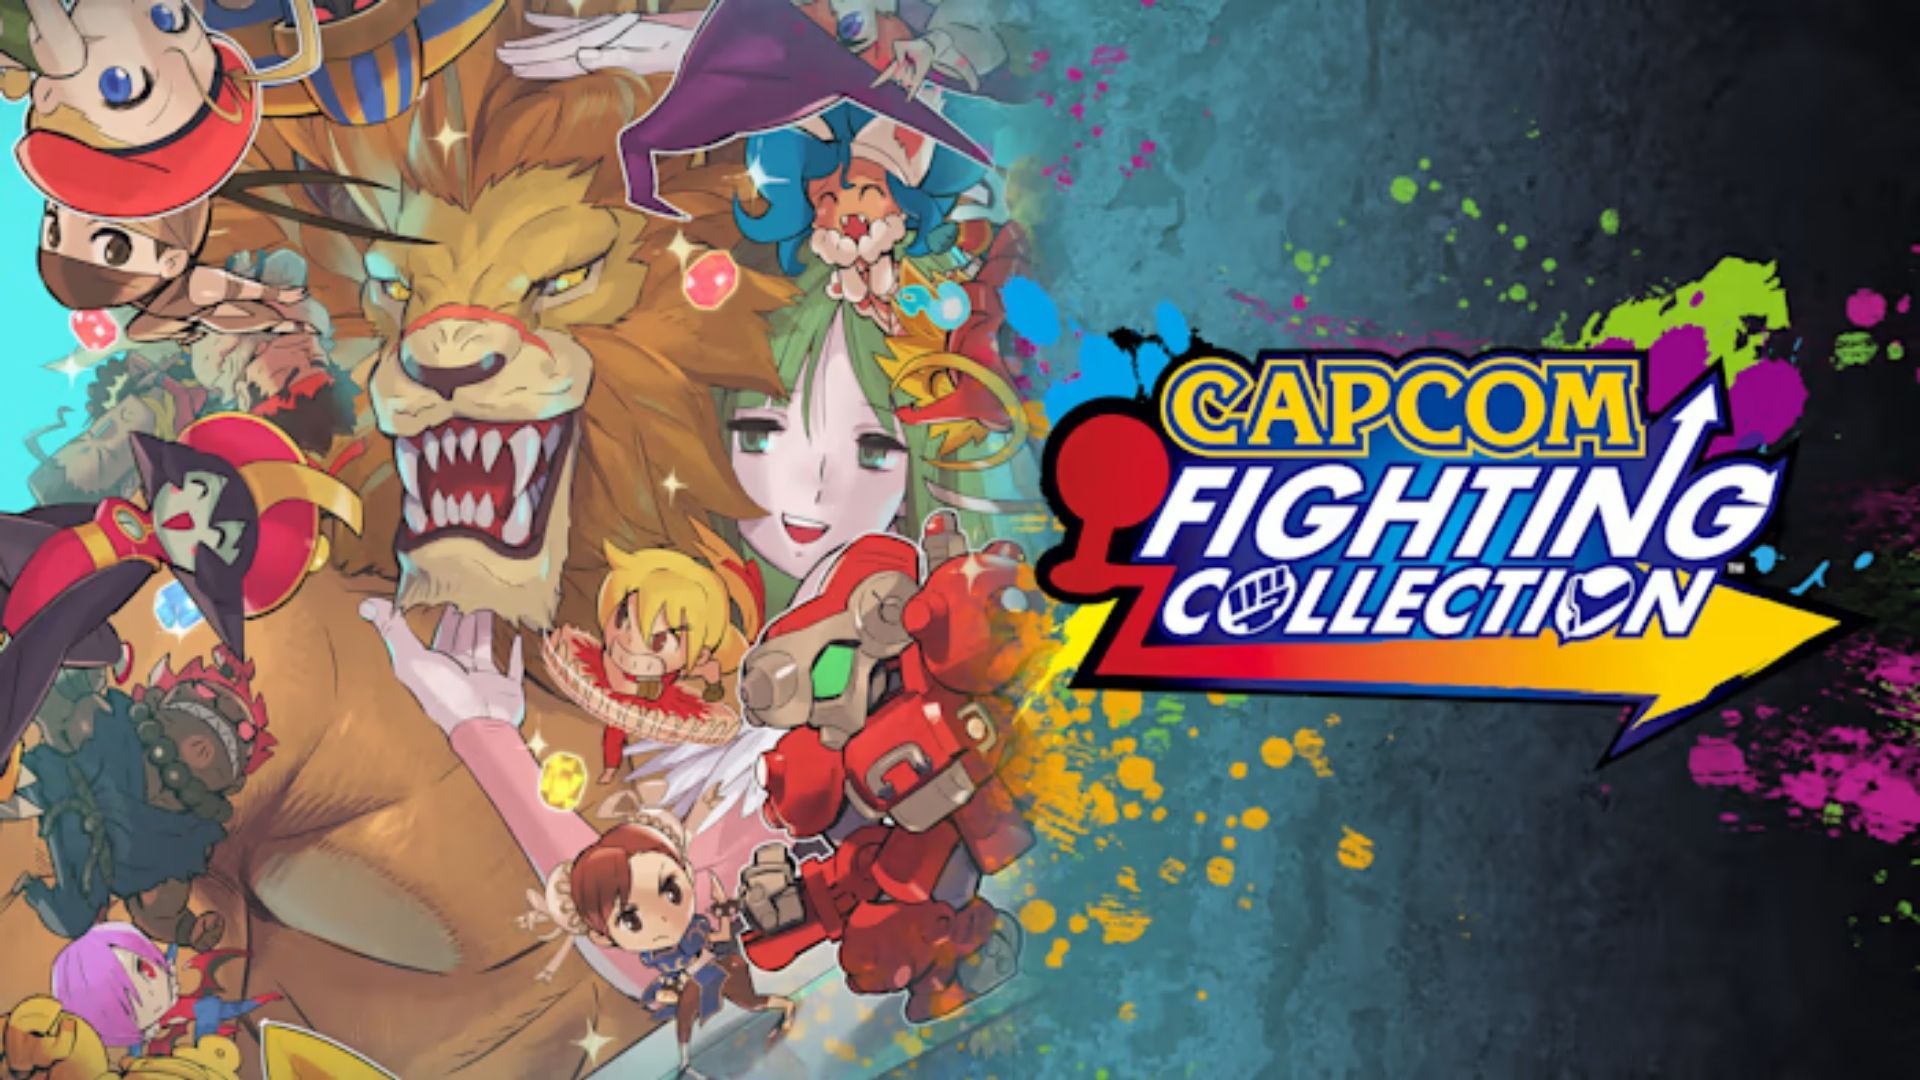 June video games: Capcom Fighting Collection